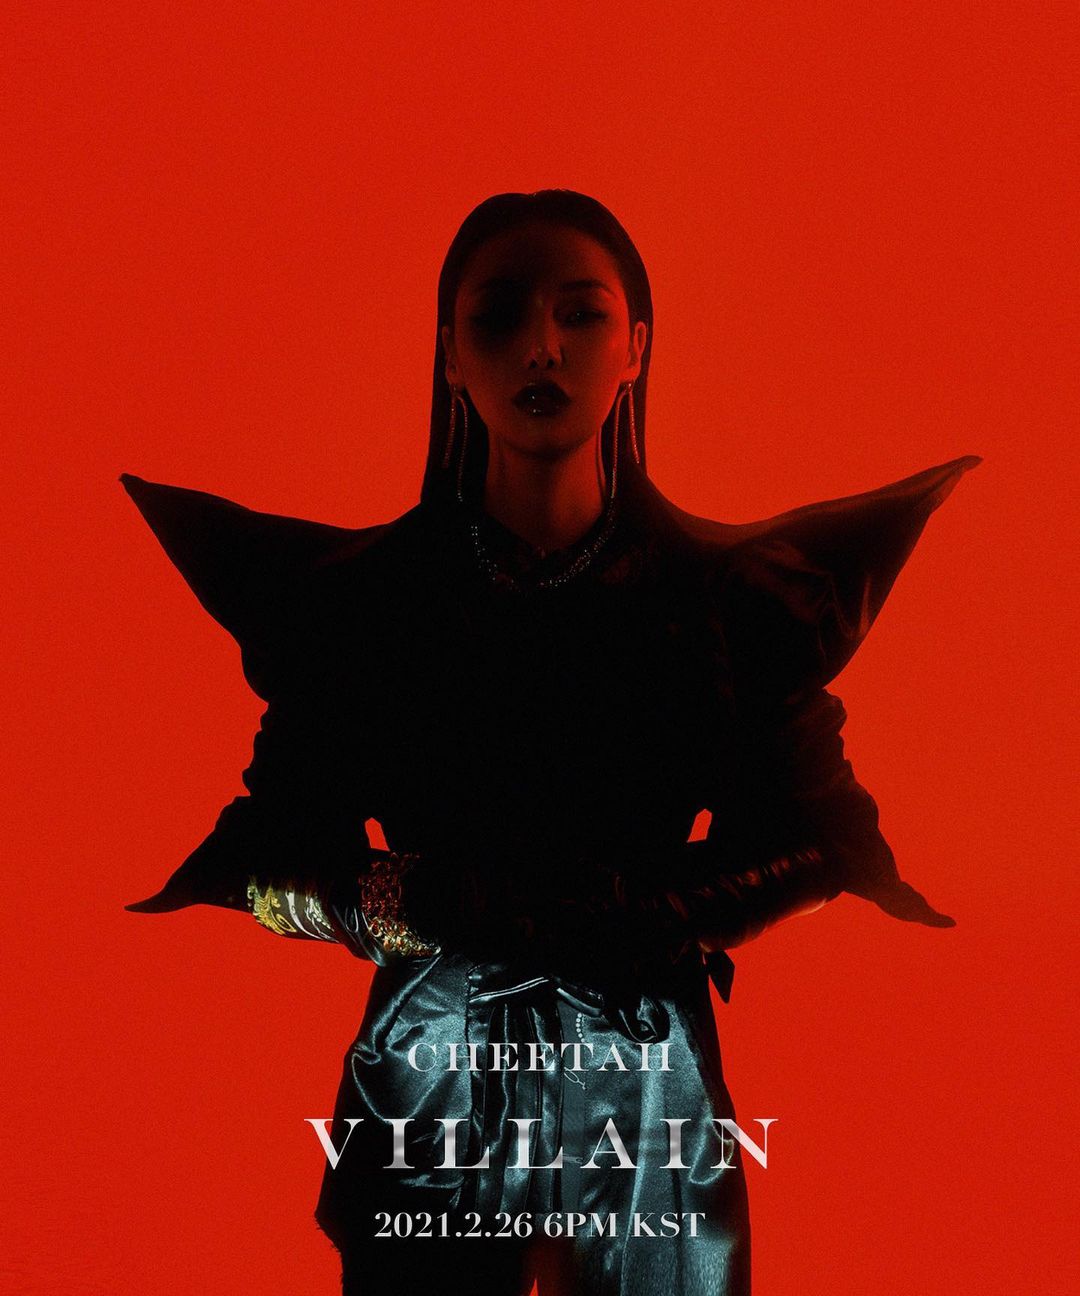 Cheetah releases new song 'Villain' today... JAMIE featureing